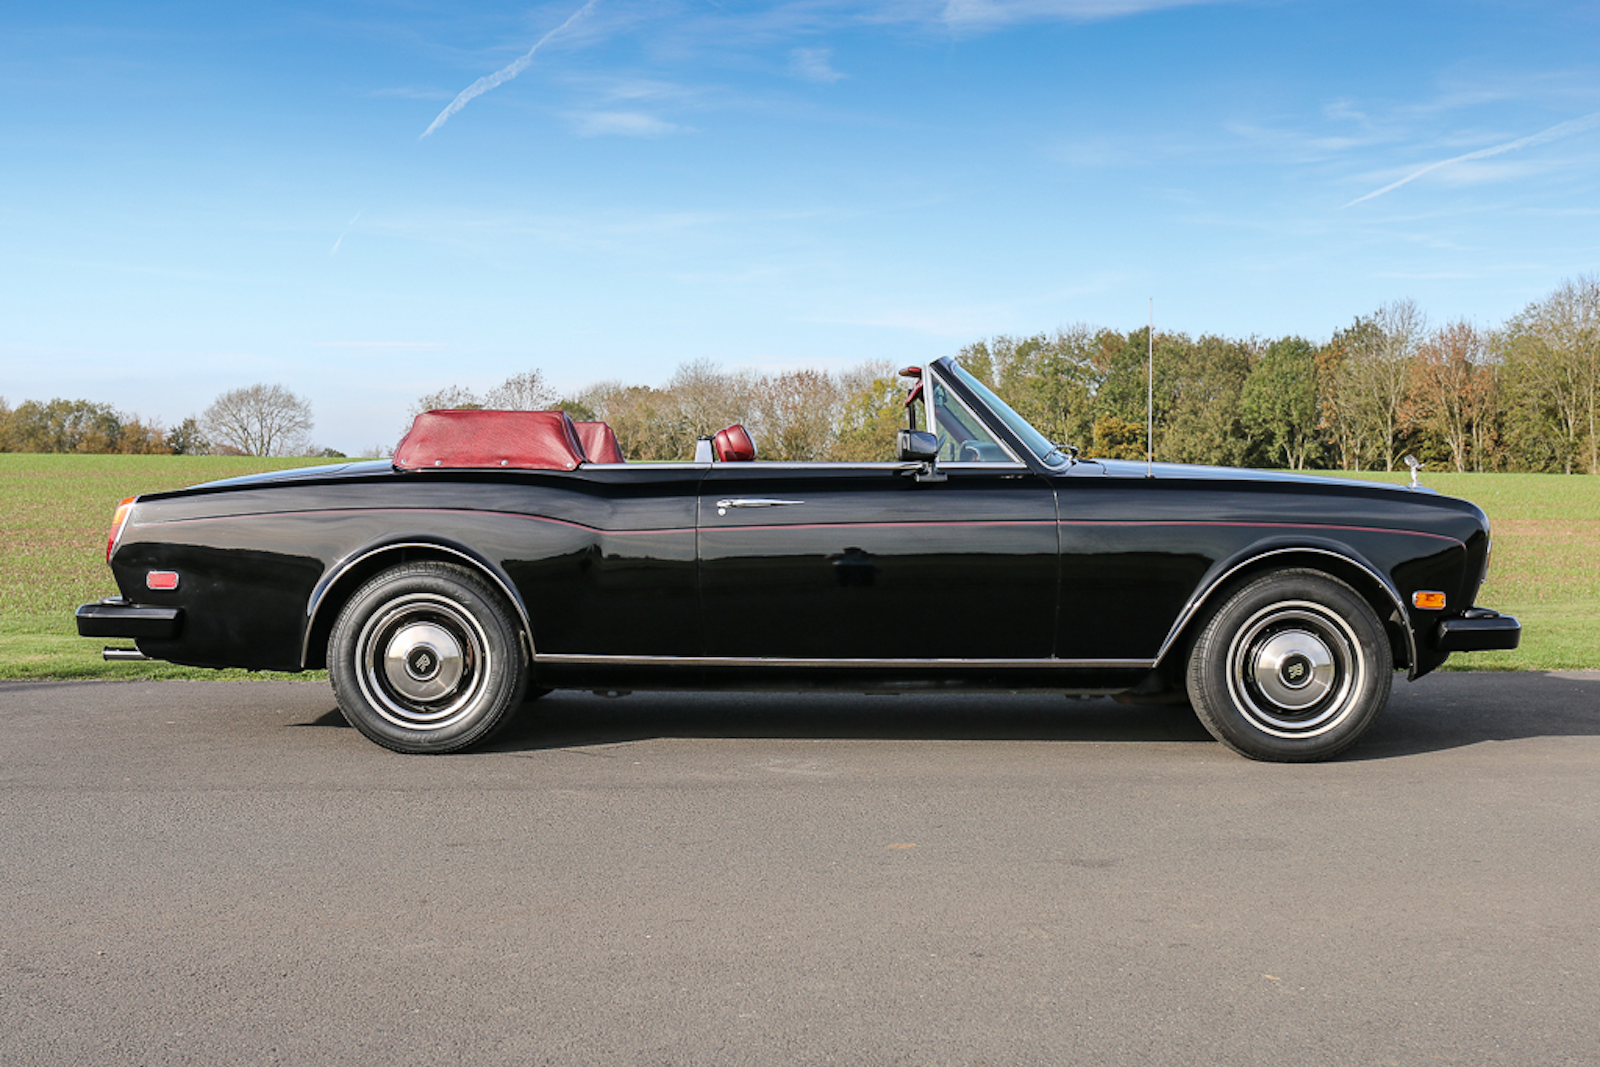 Come drive with me: Frank Sinatra’s Rolls-Royce Corniche up for sale